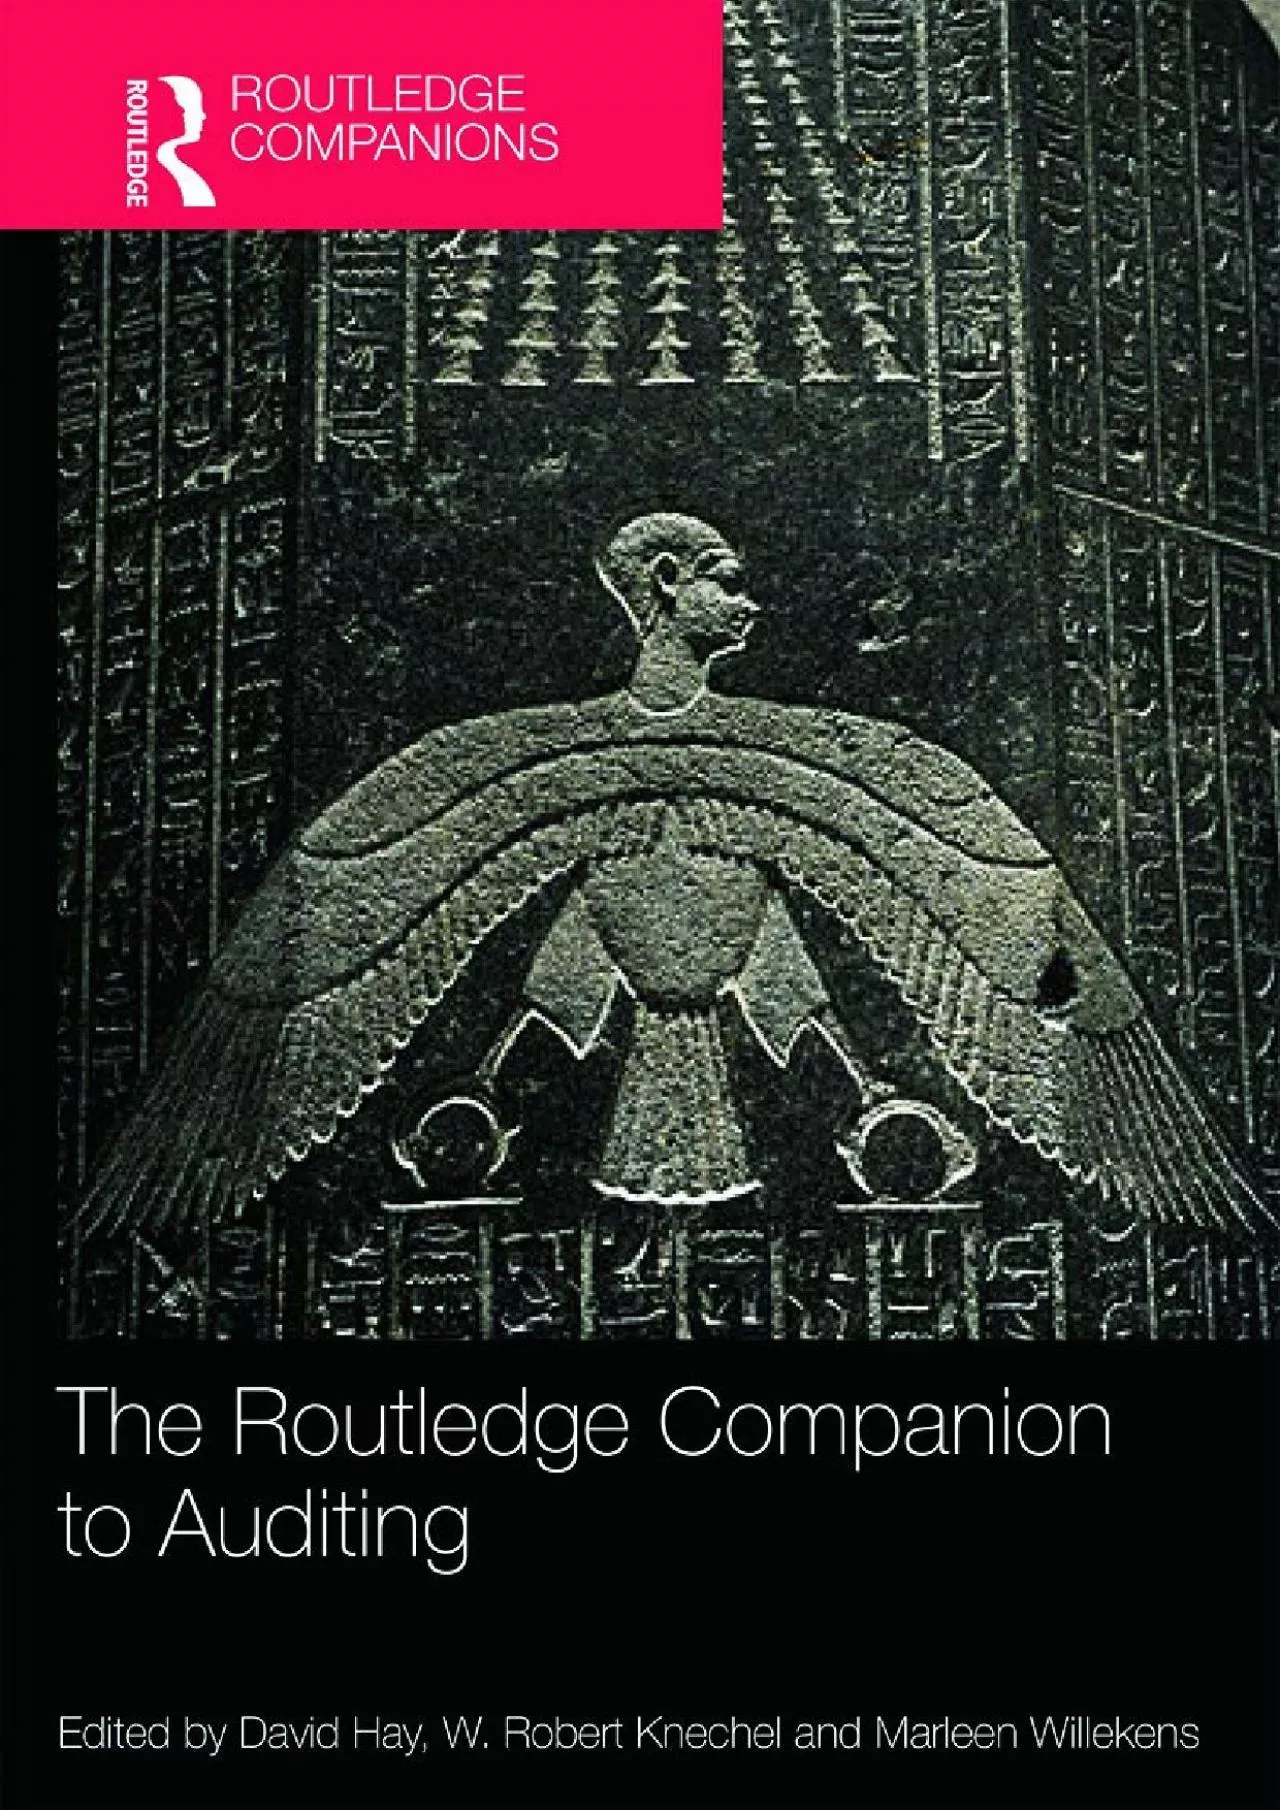 (BOOS)-The Routledge Companion to Auditing (Routledge Companions in Business, Management